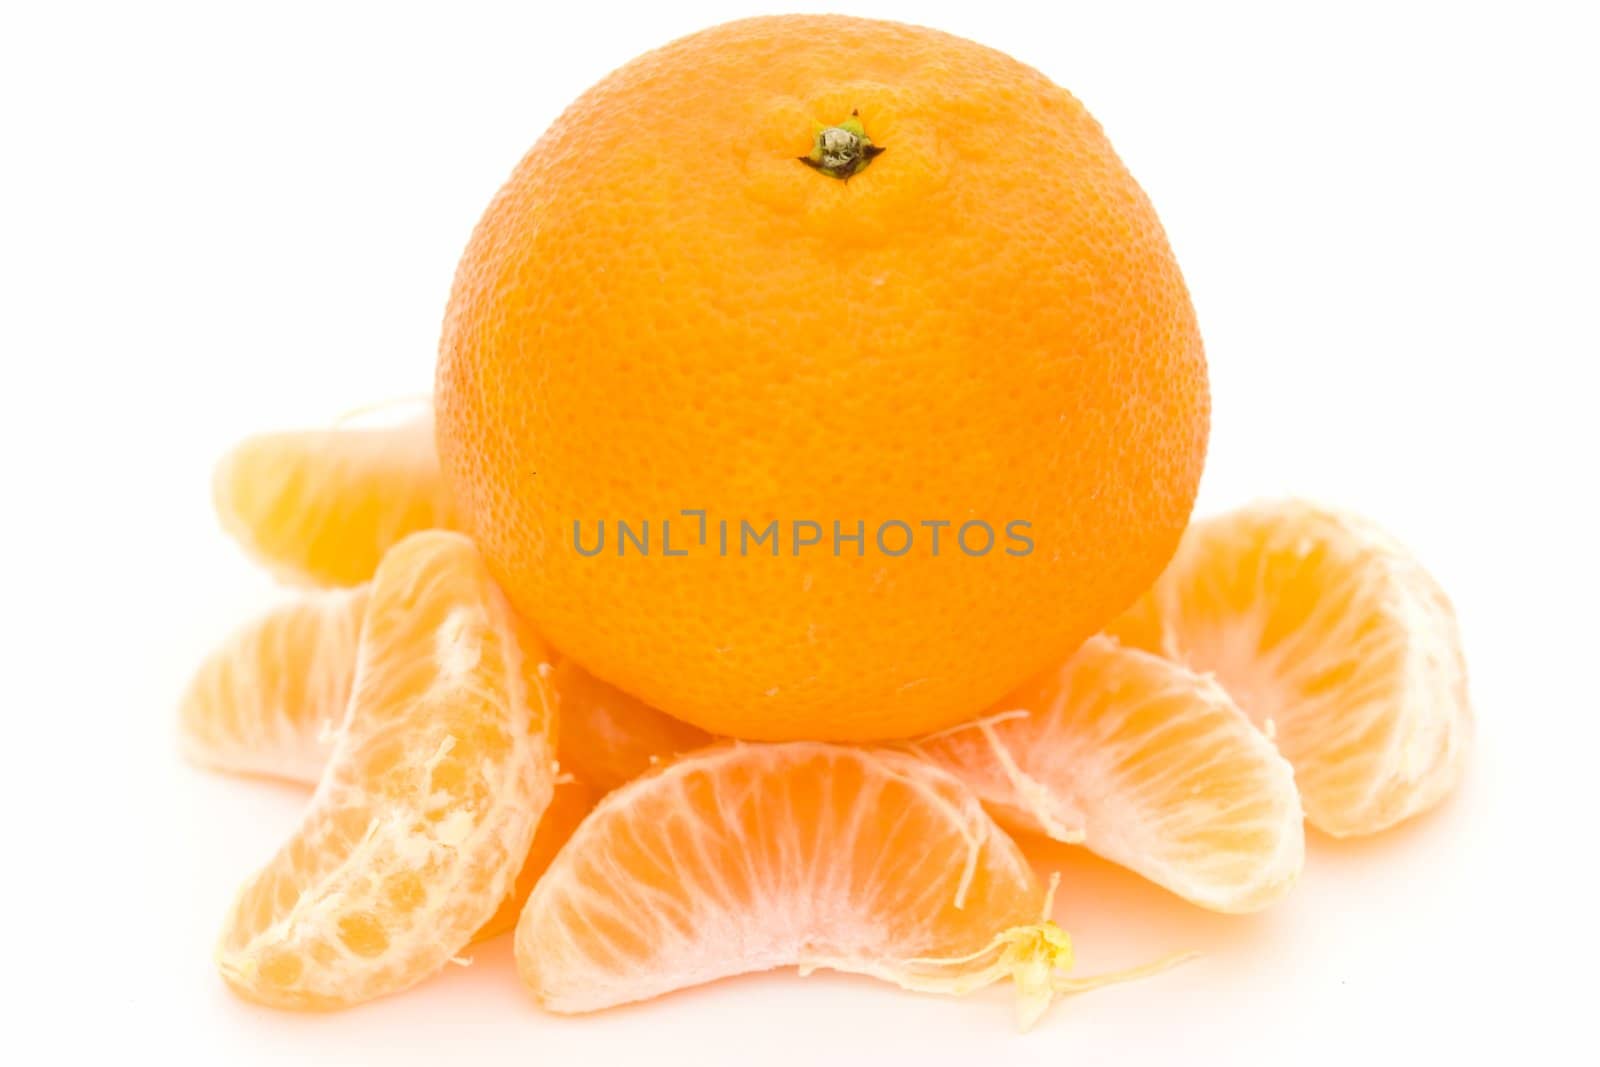 mandarin and some tangerine segments on a white background